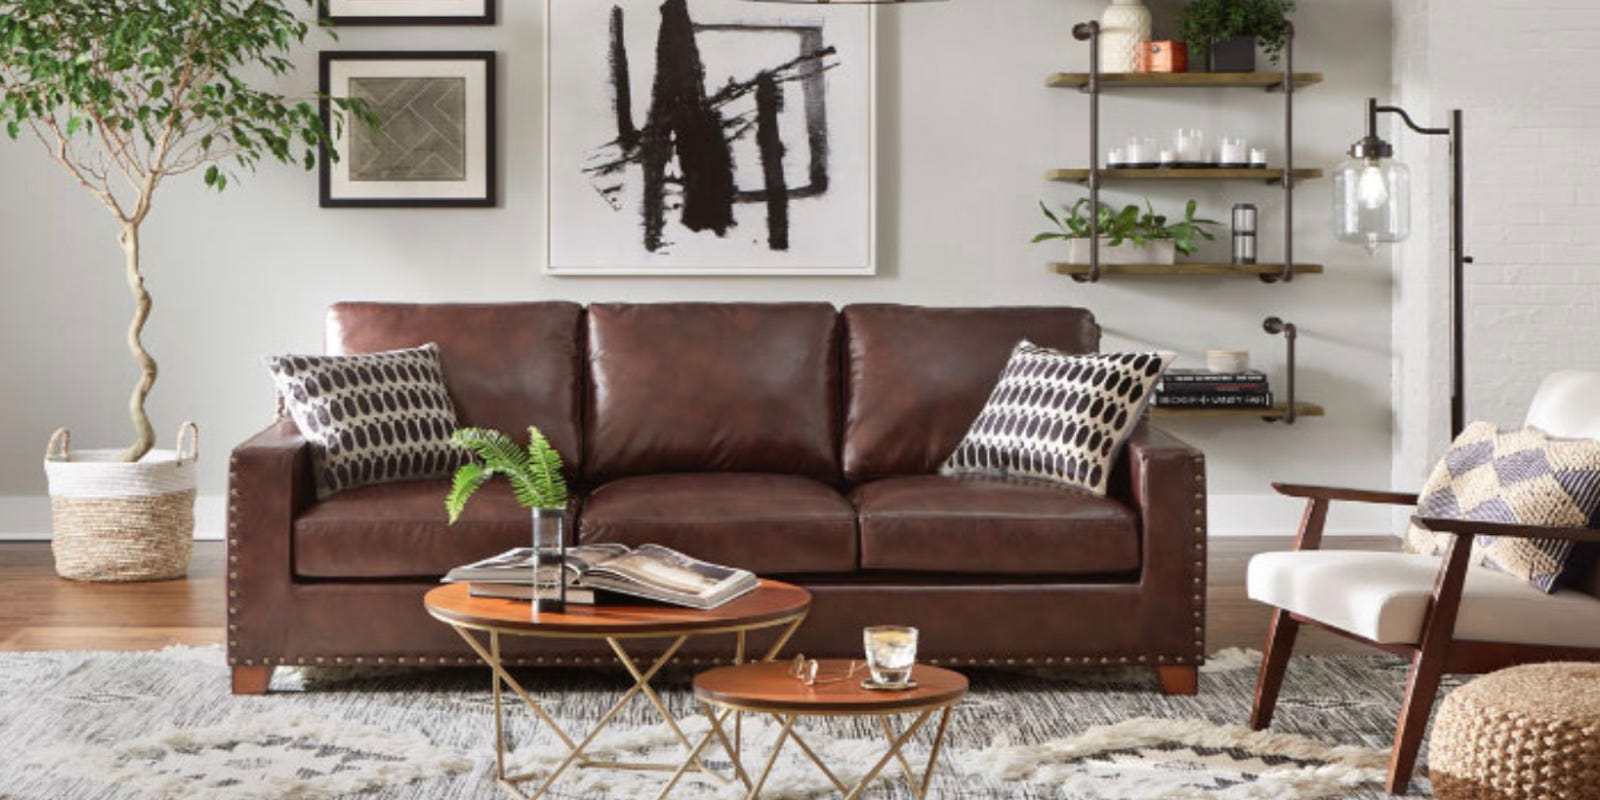 Columbus Day Sales Home Depot Offers Huge Discounts On Furniture